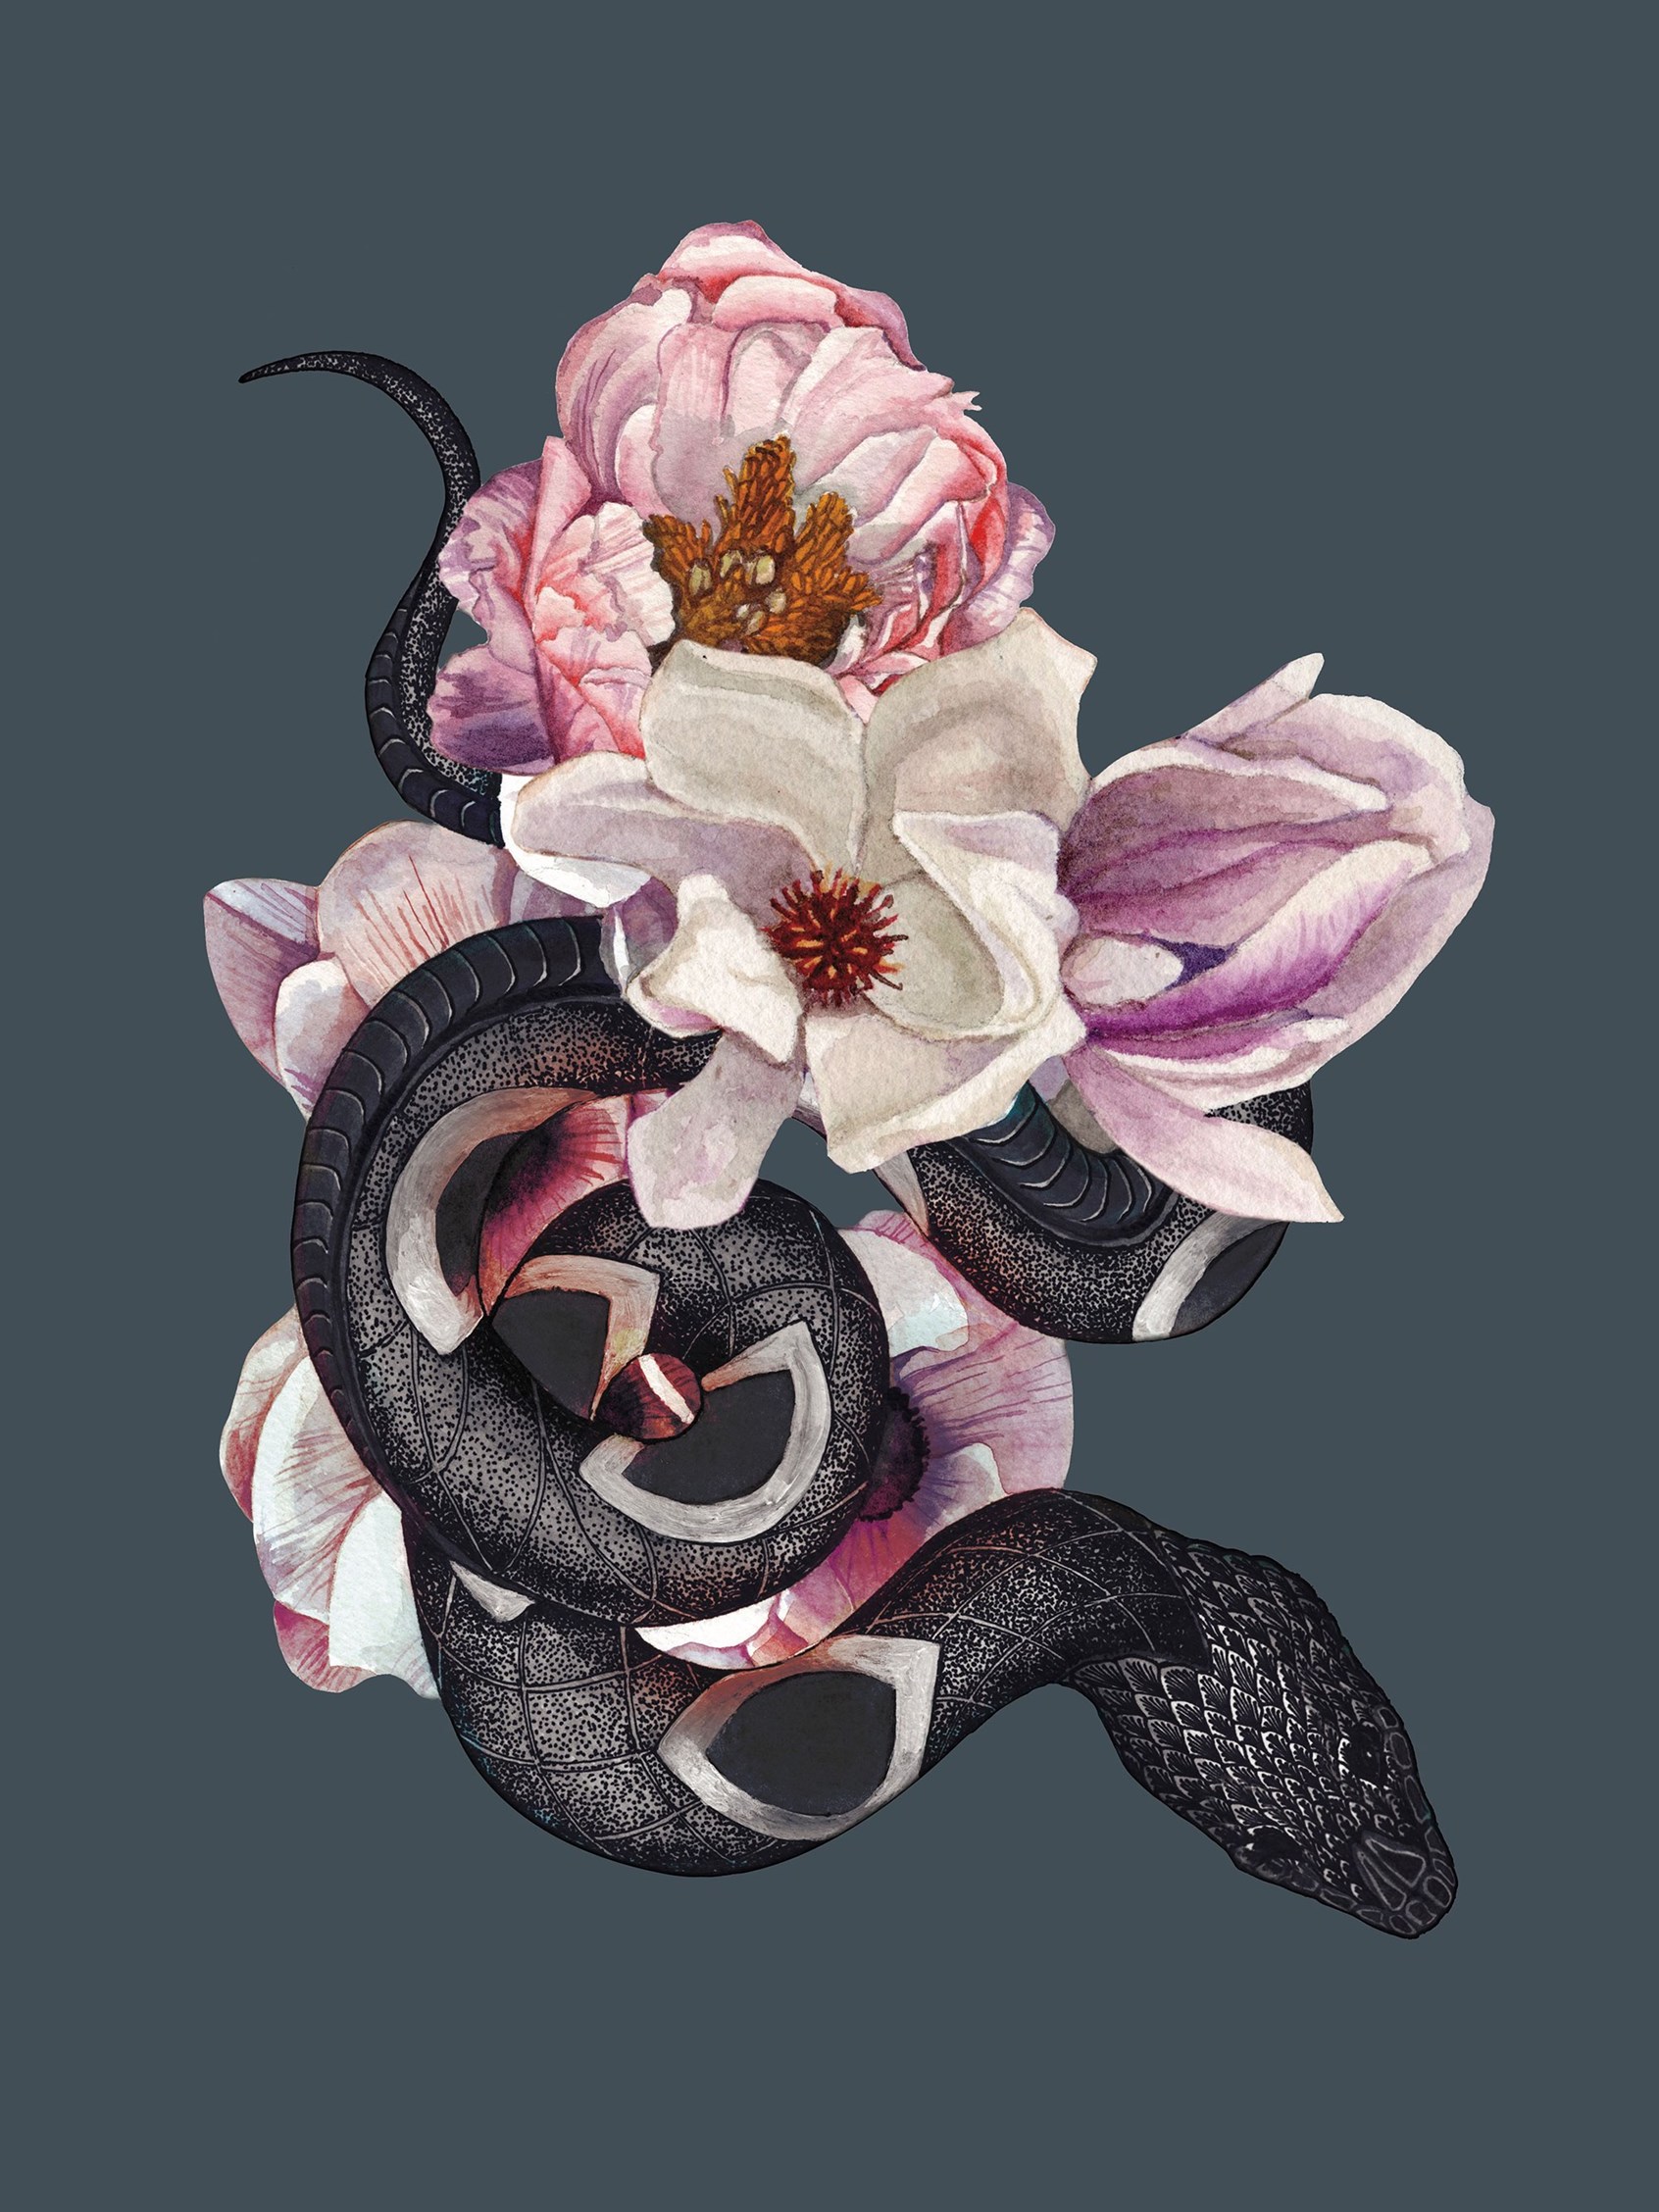 Illustration of a black snake curled around a bouquet of flowers.